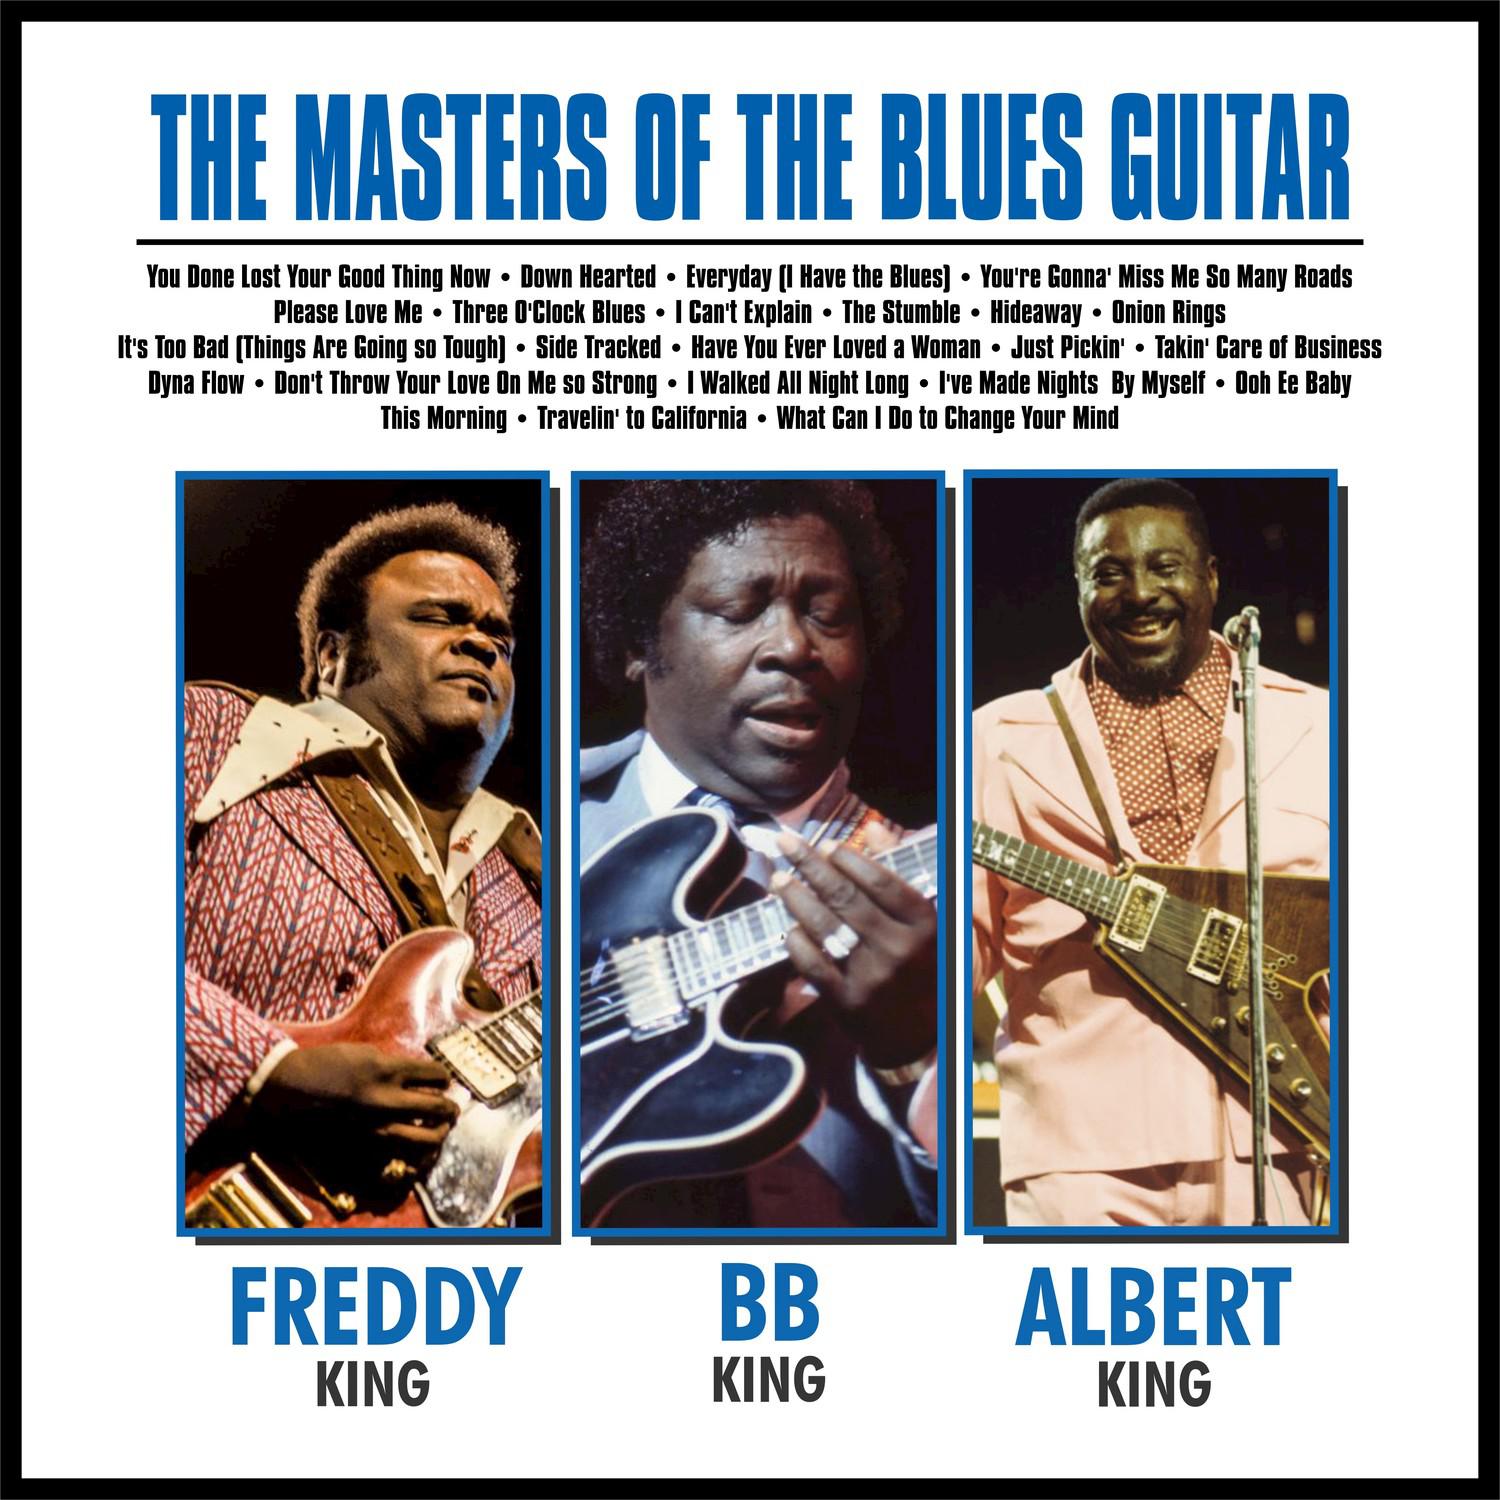 The Masters of the Blues Guitar…… BB, Albert and Freddy